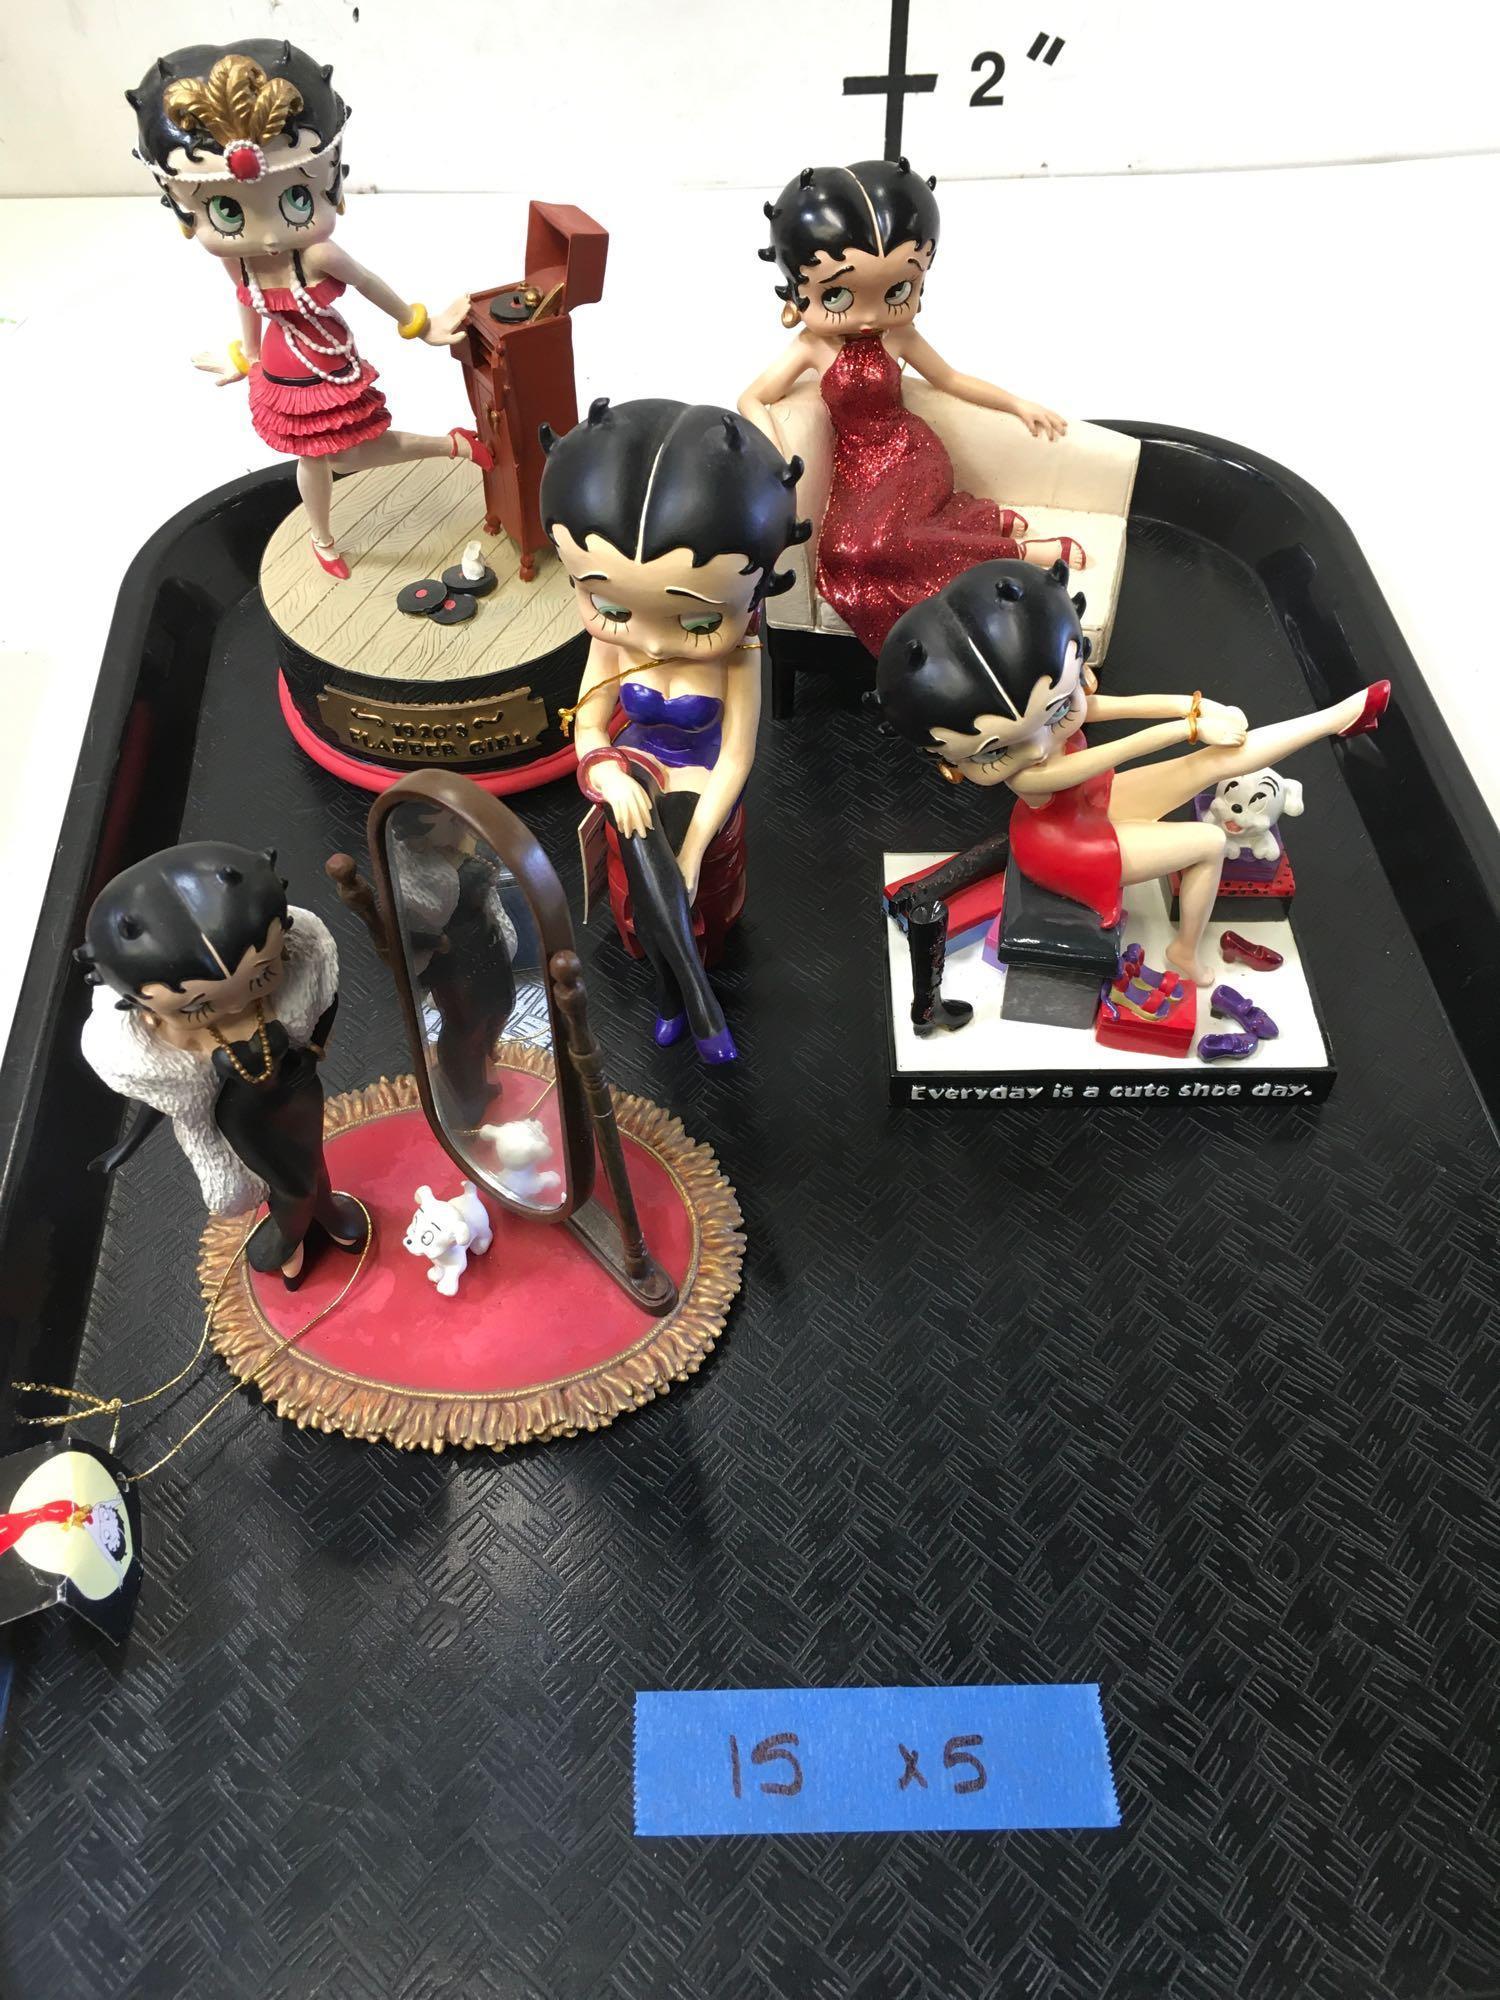 Collectible Betty Boop figurines and music box